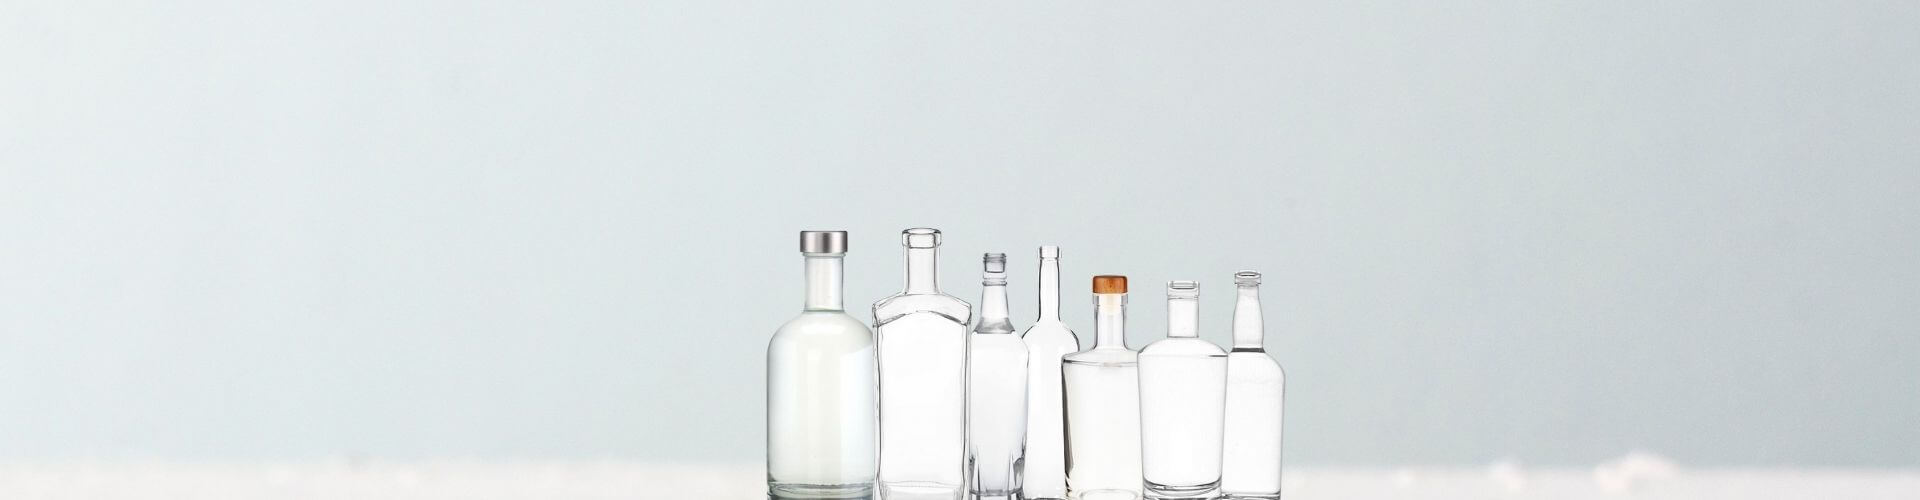 Glass liquor bottle manufacturers in China-LOM Glassworks